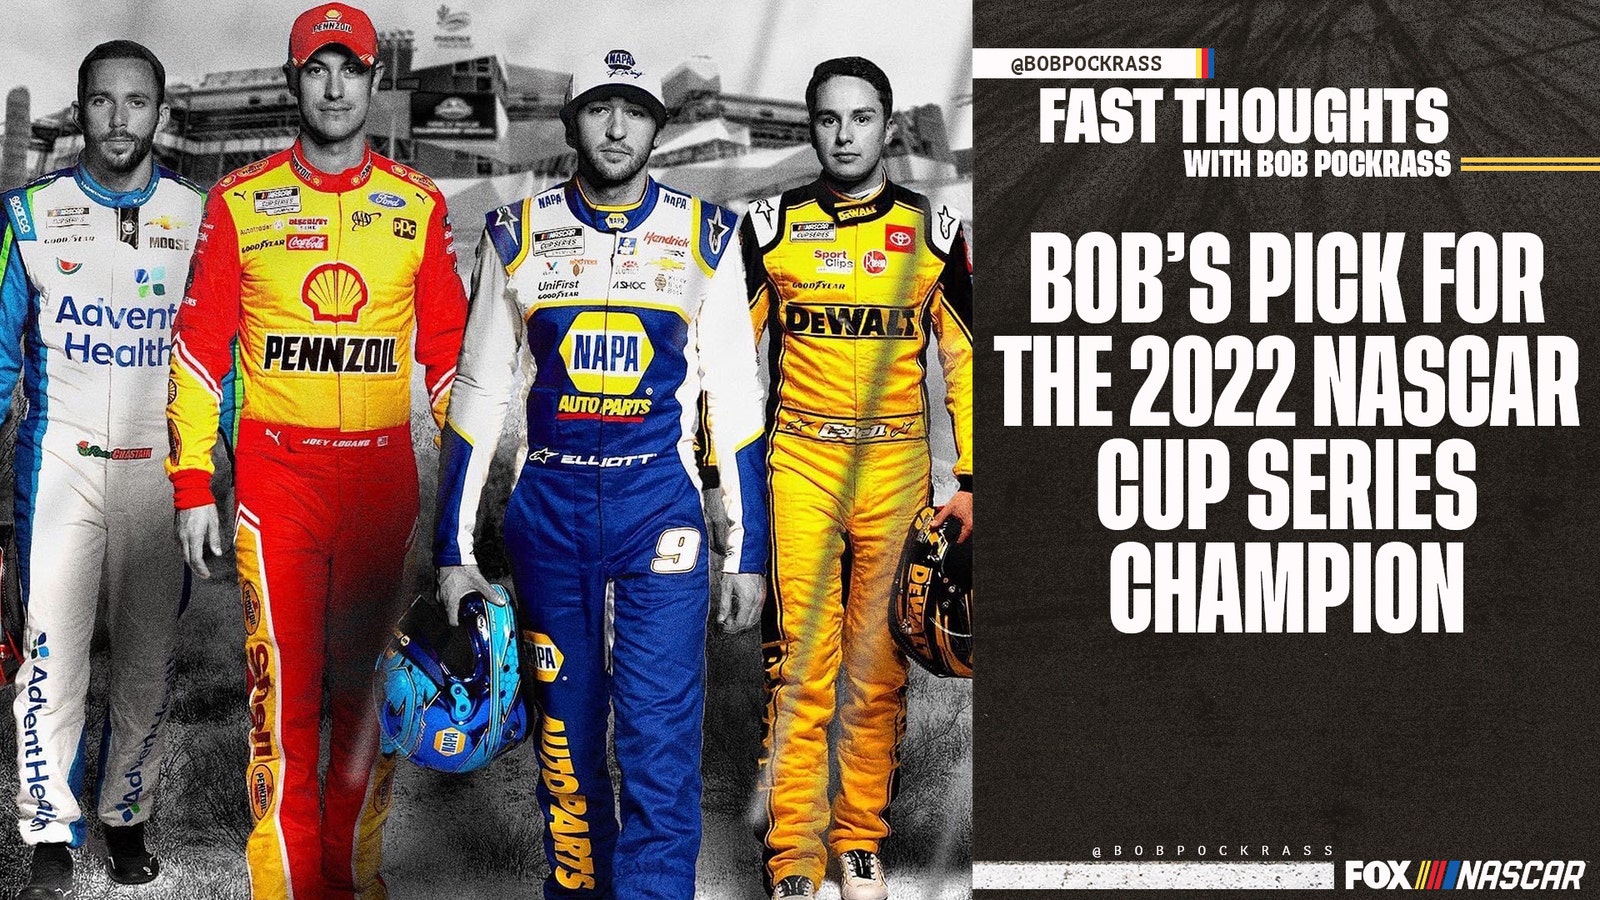 Fast Thoughts: Bob Pockrass makes his pick for the 2022 NASCAR Cup Series Champion